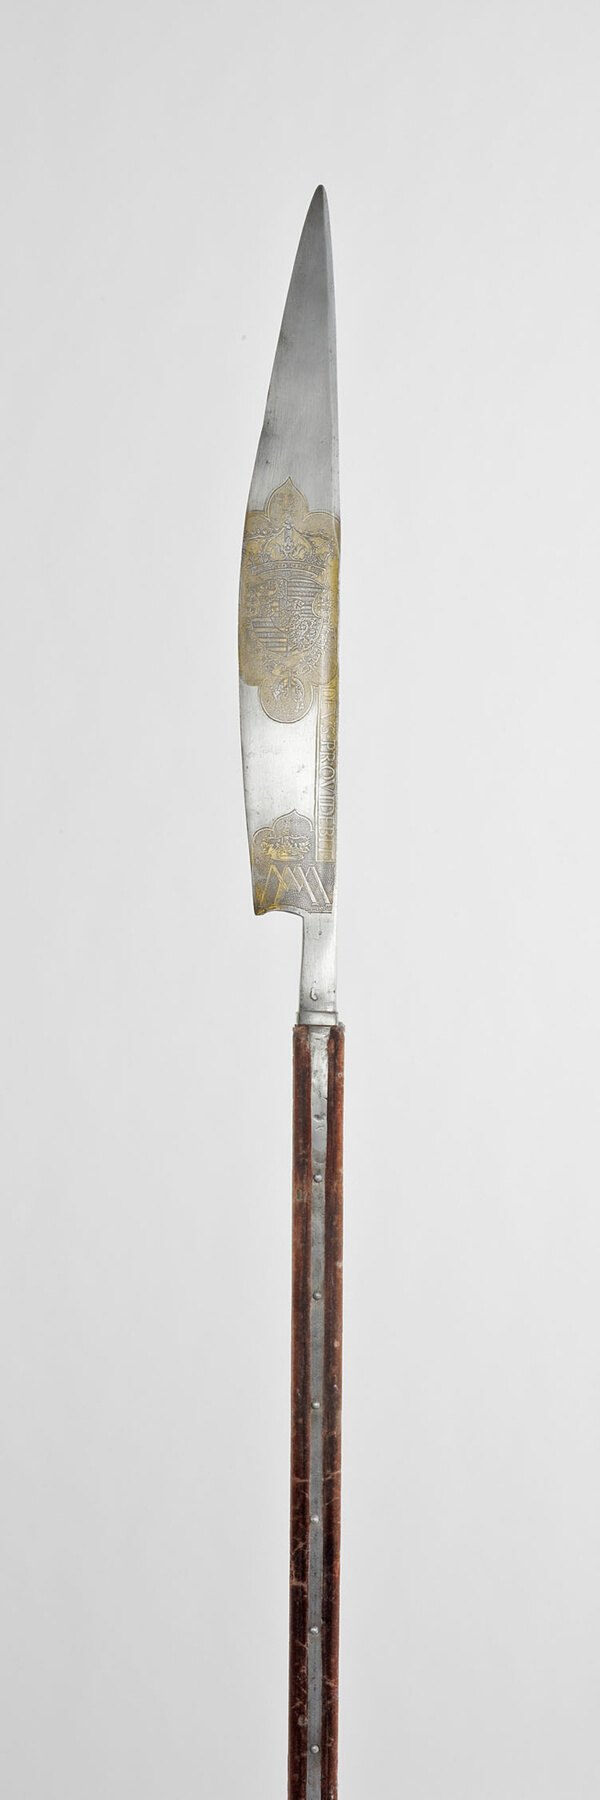 Glaive for the Bodyguard of King of Hungry and Bohemia (Later Emperor) Maximilian II